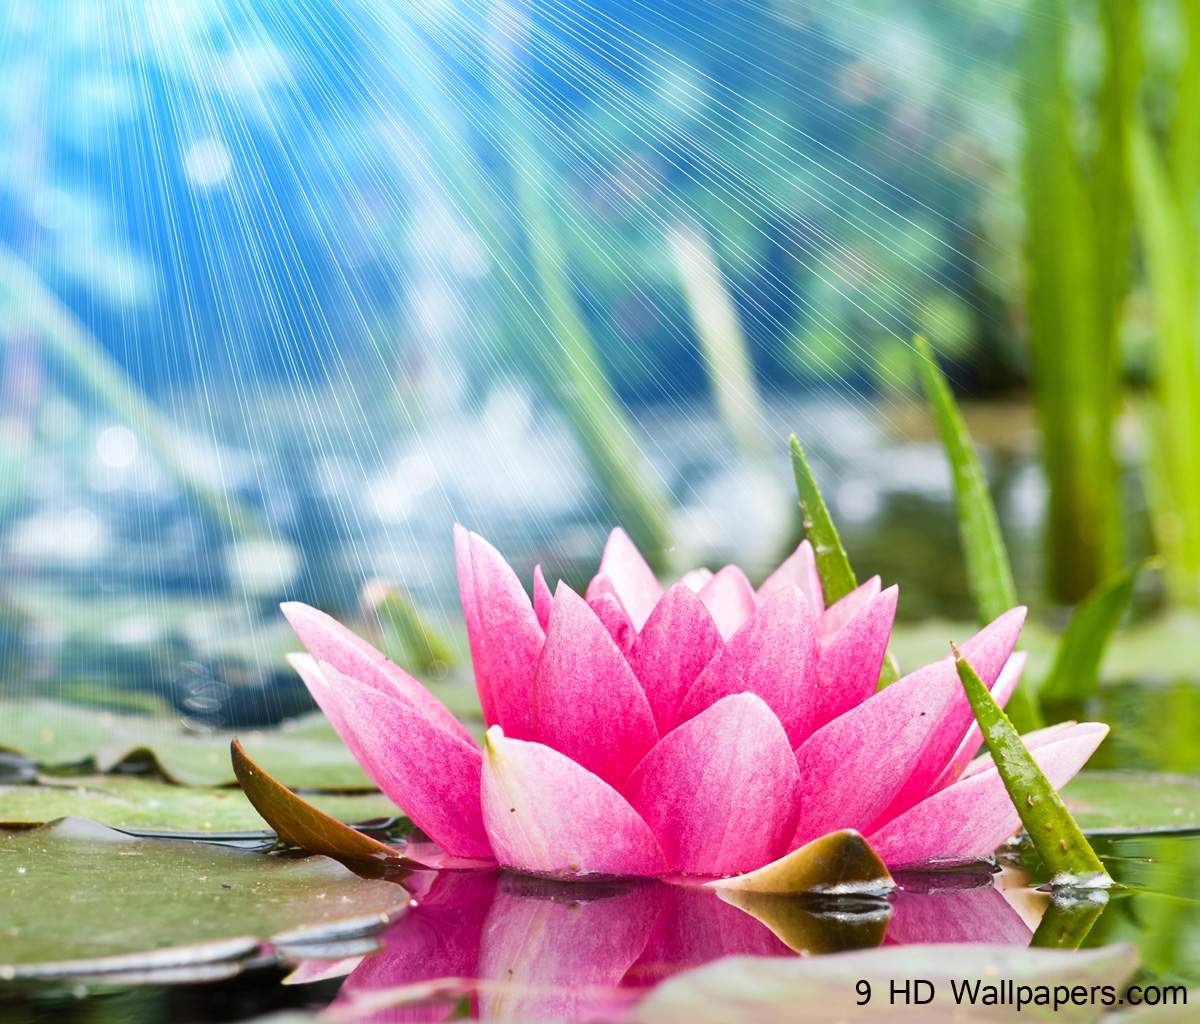 Lotus Flower HD Wallpaper, Flowers Image And Photo